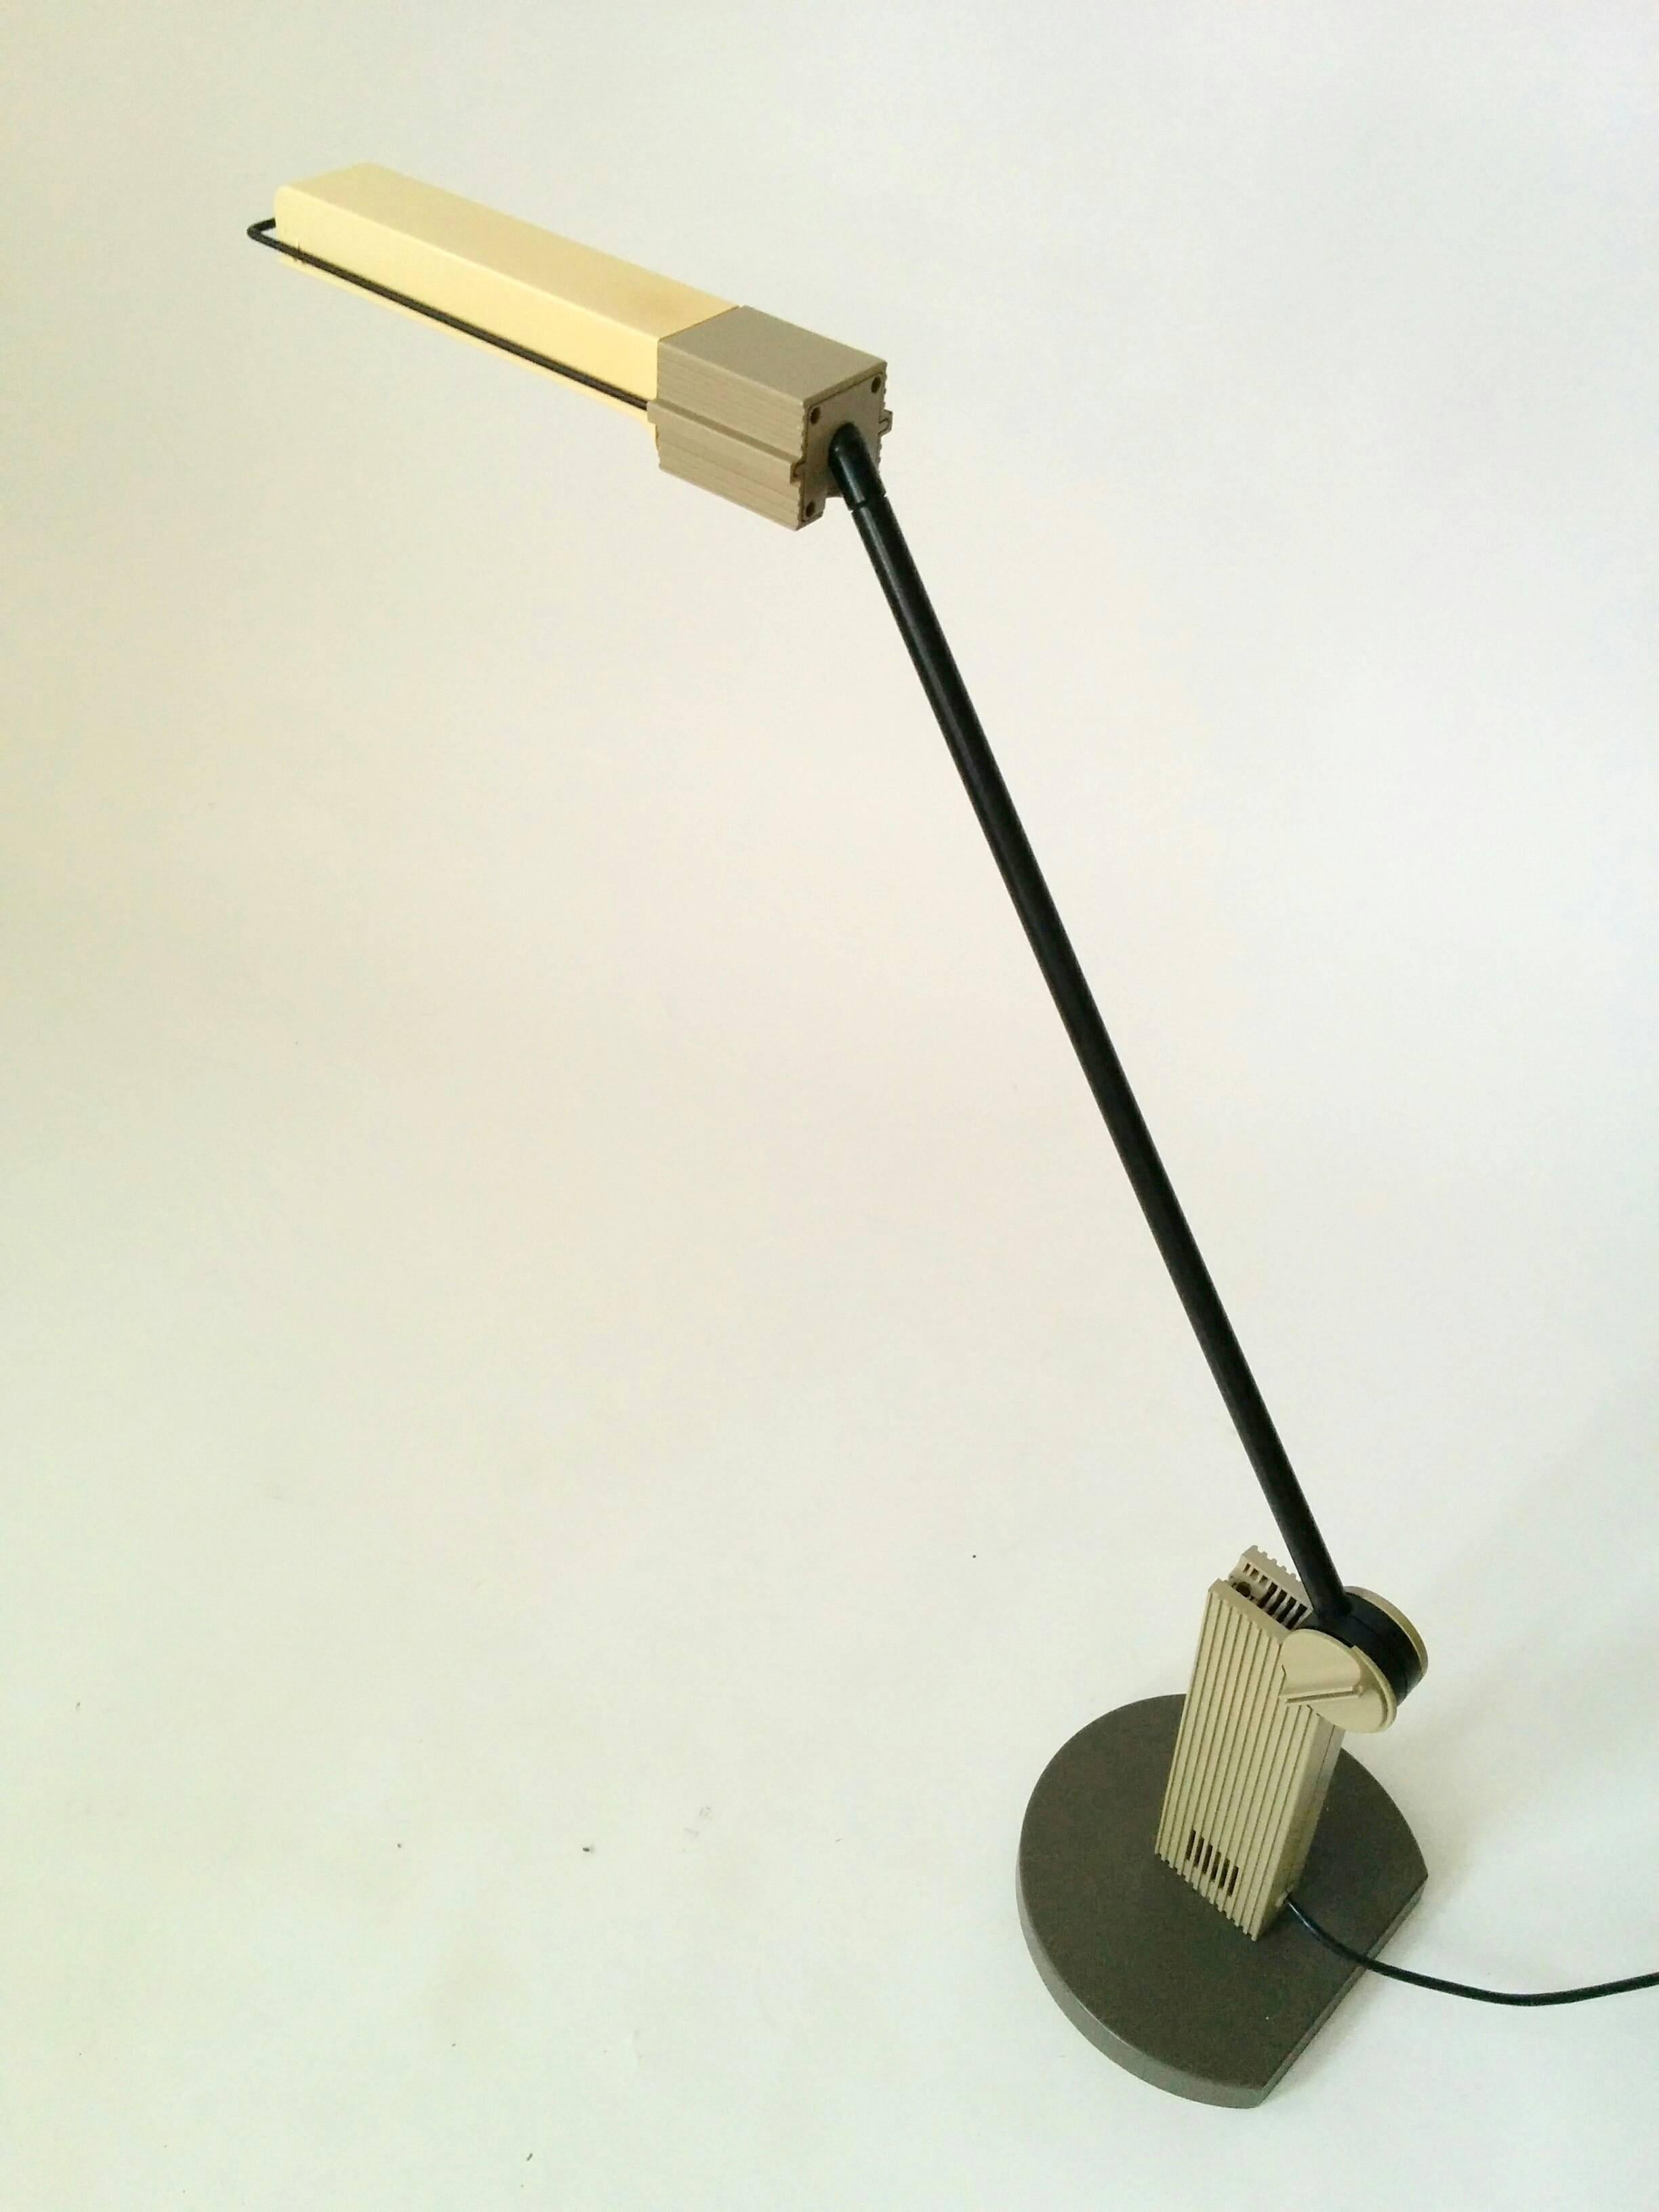 Agile fluorescent work table lamp that goes in all direction. 

Arm measure in a straight horizontal position 35 inches long with shade. 

ON/OFF switch on rotating base.

